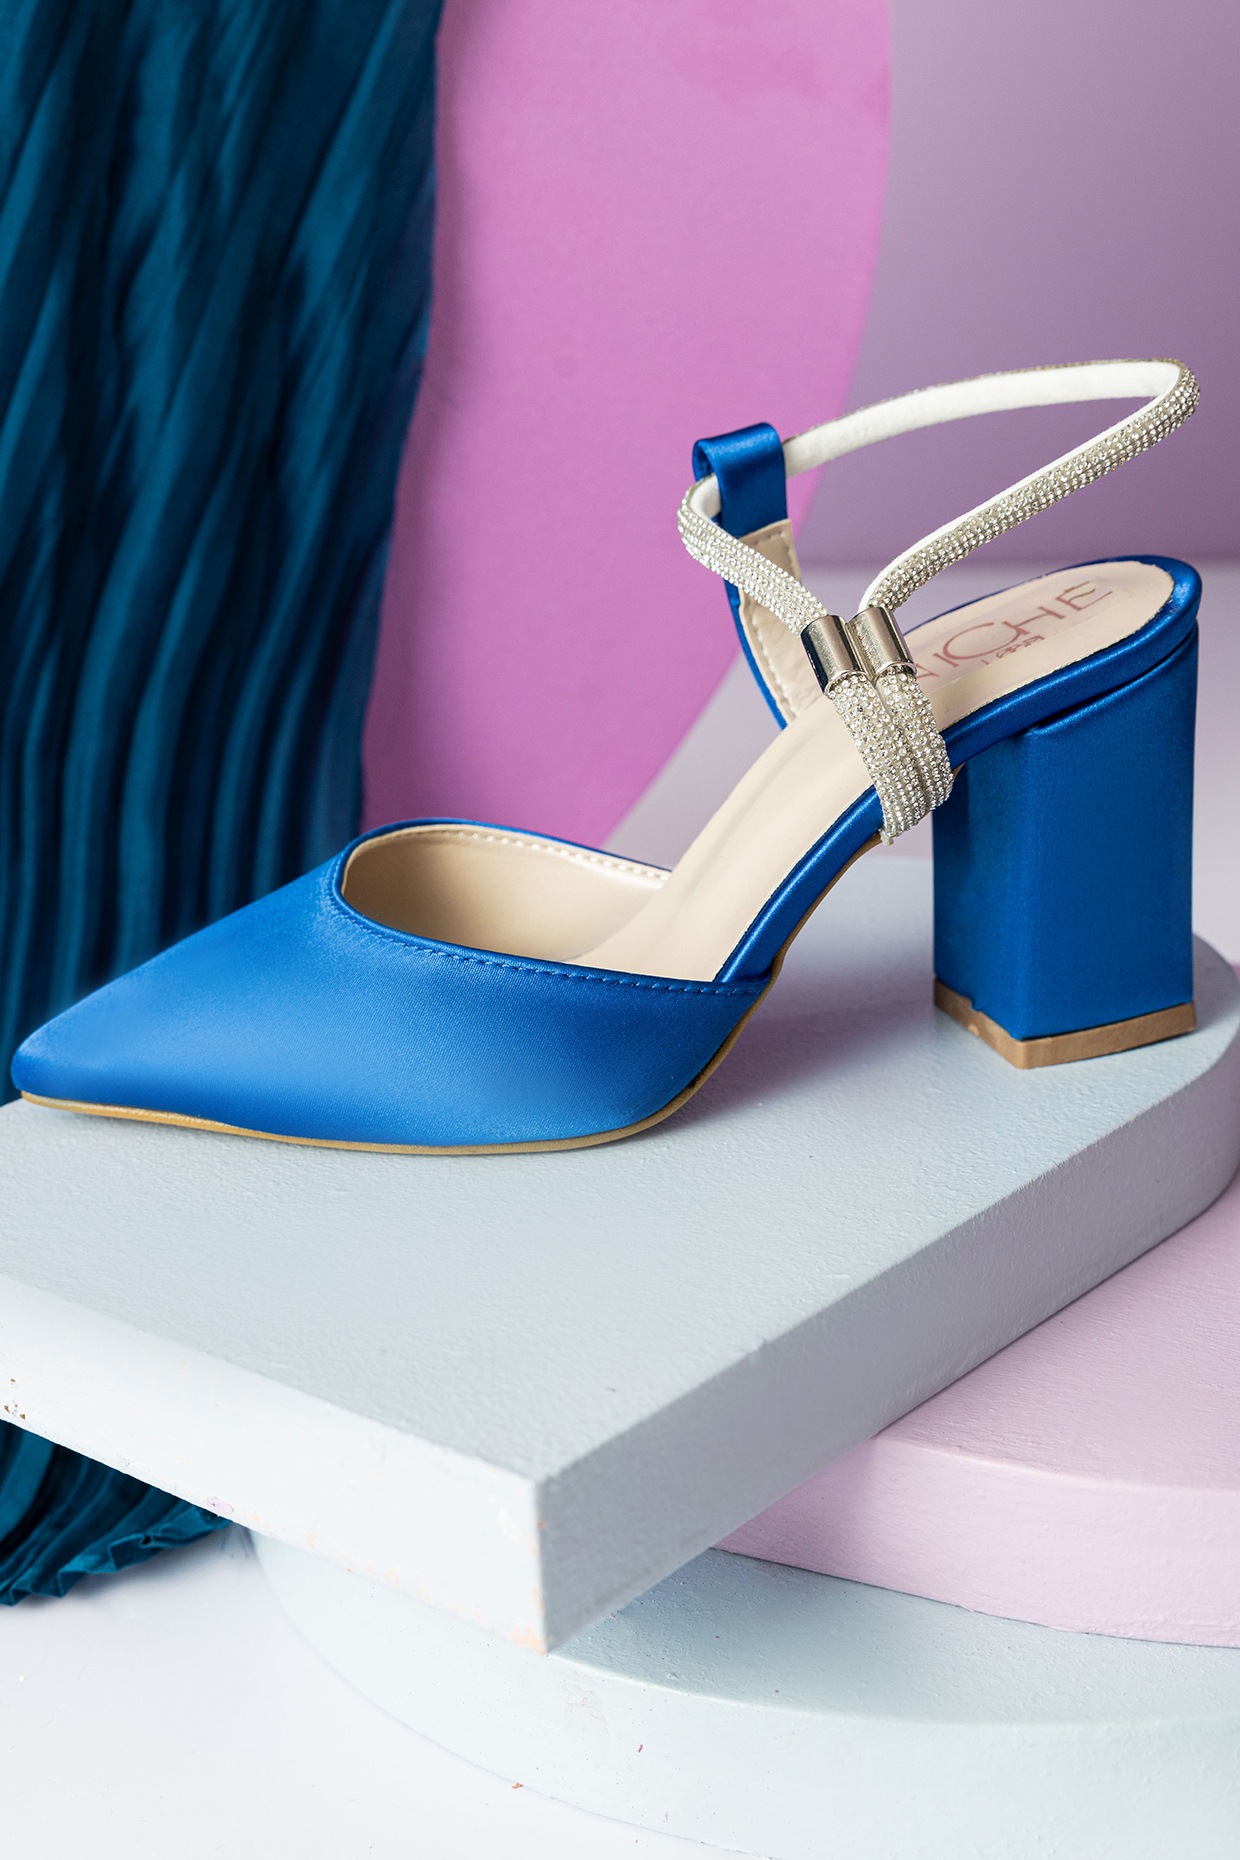 Blue Wedding Shoes: 28 of the Best Blue Wedding Heels & Flats -  hitched.co.uk - hitched.co.uk